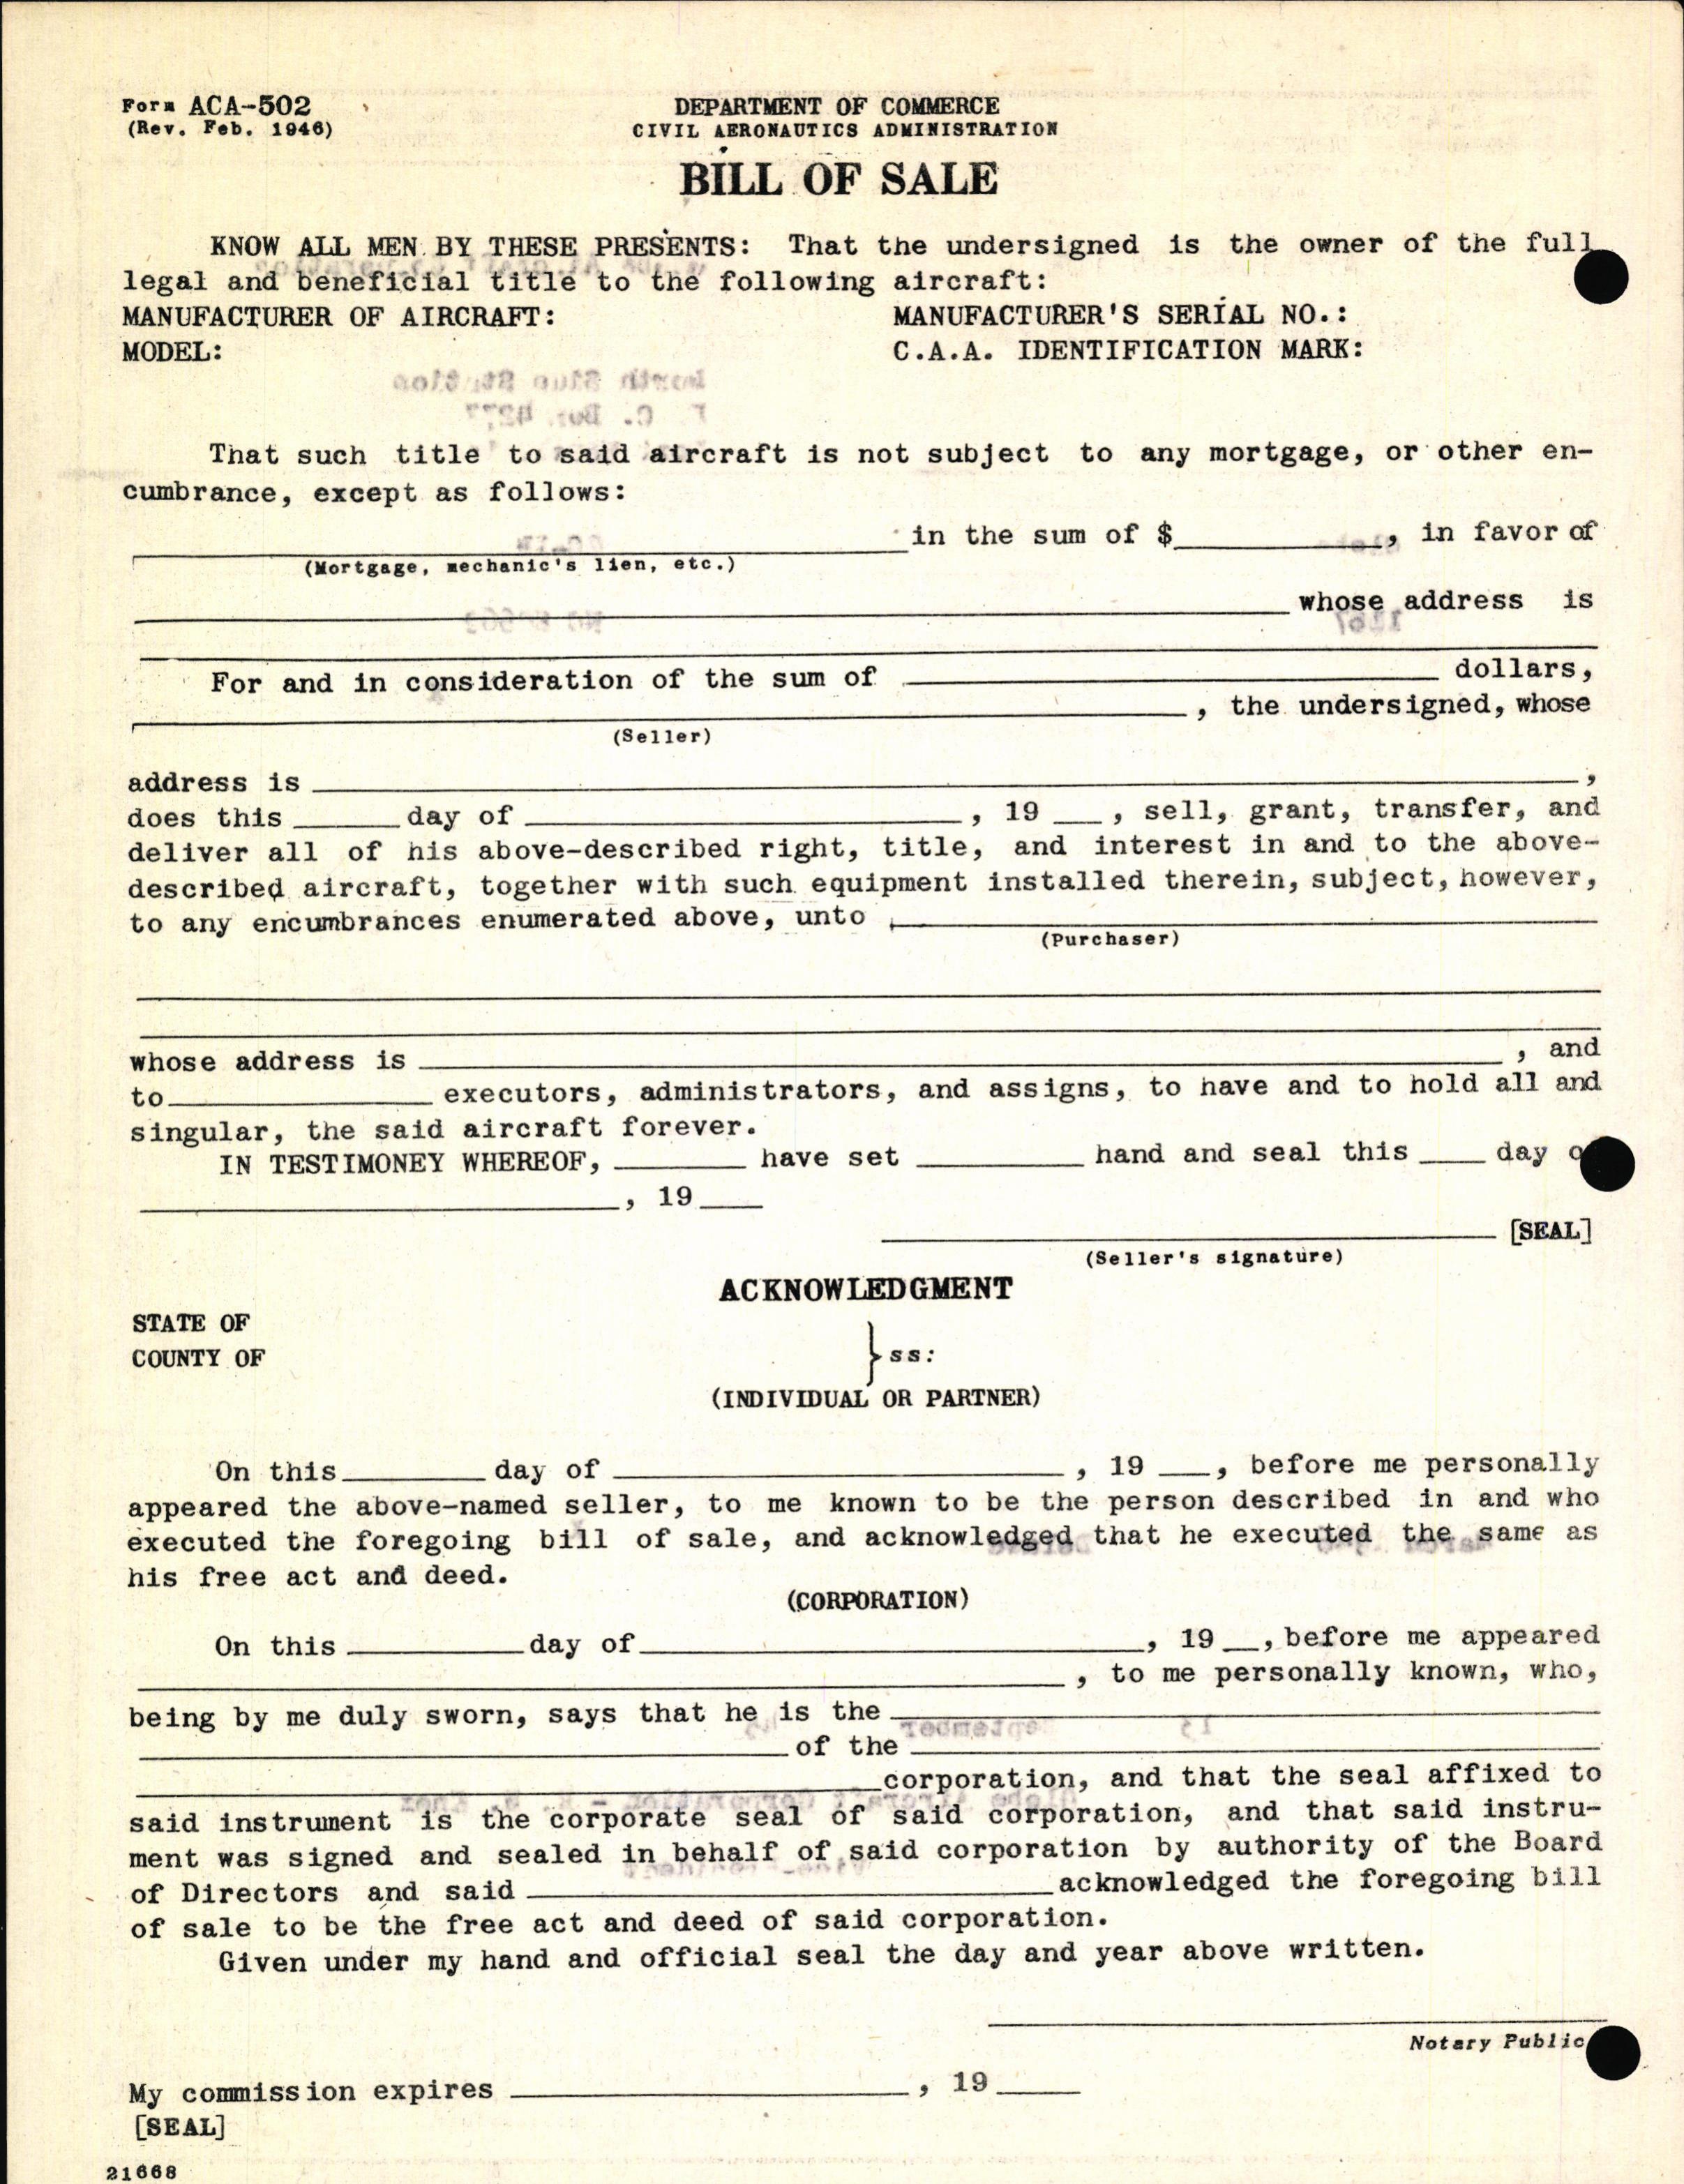 Sample page 4 from AirCorps Library document: Technical Information for Serial Number 1067